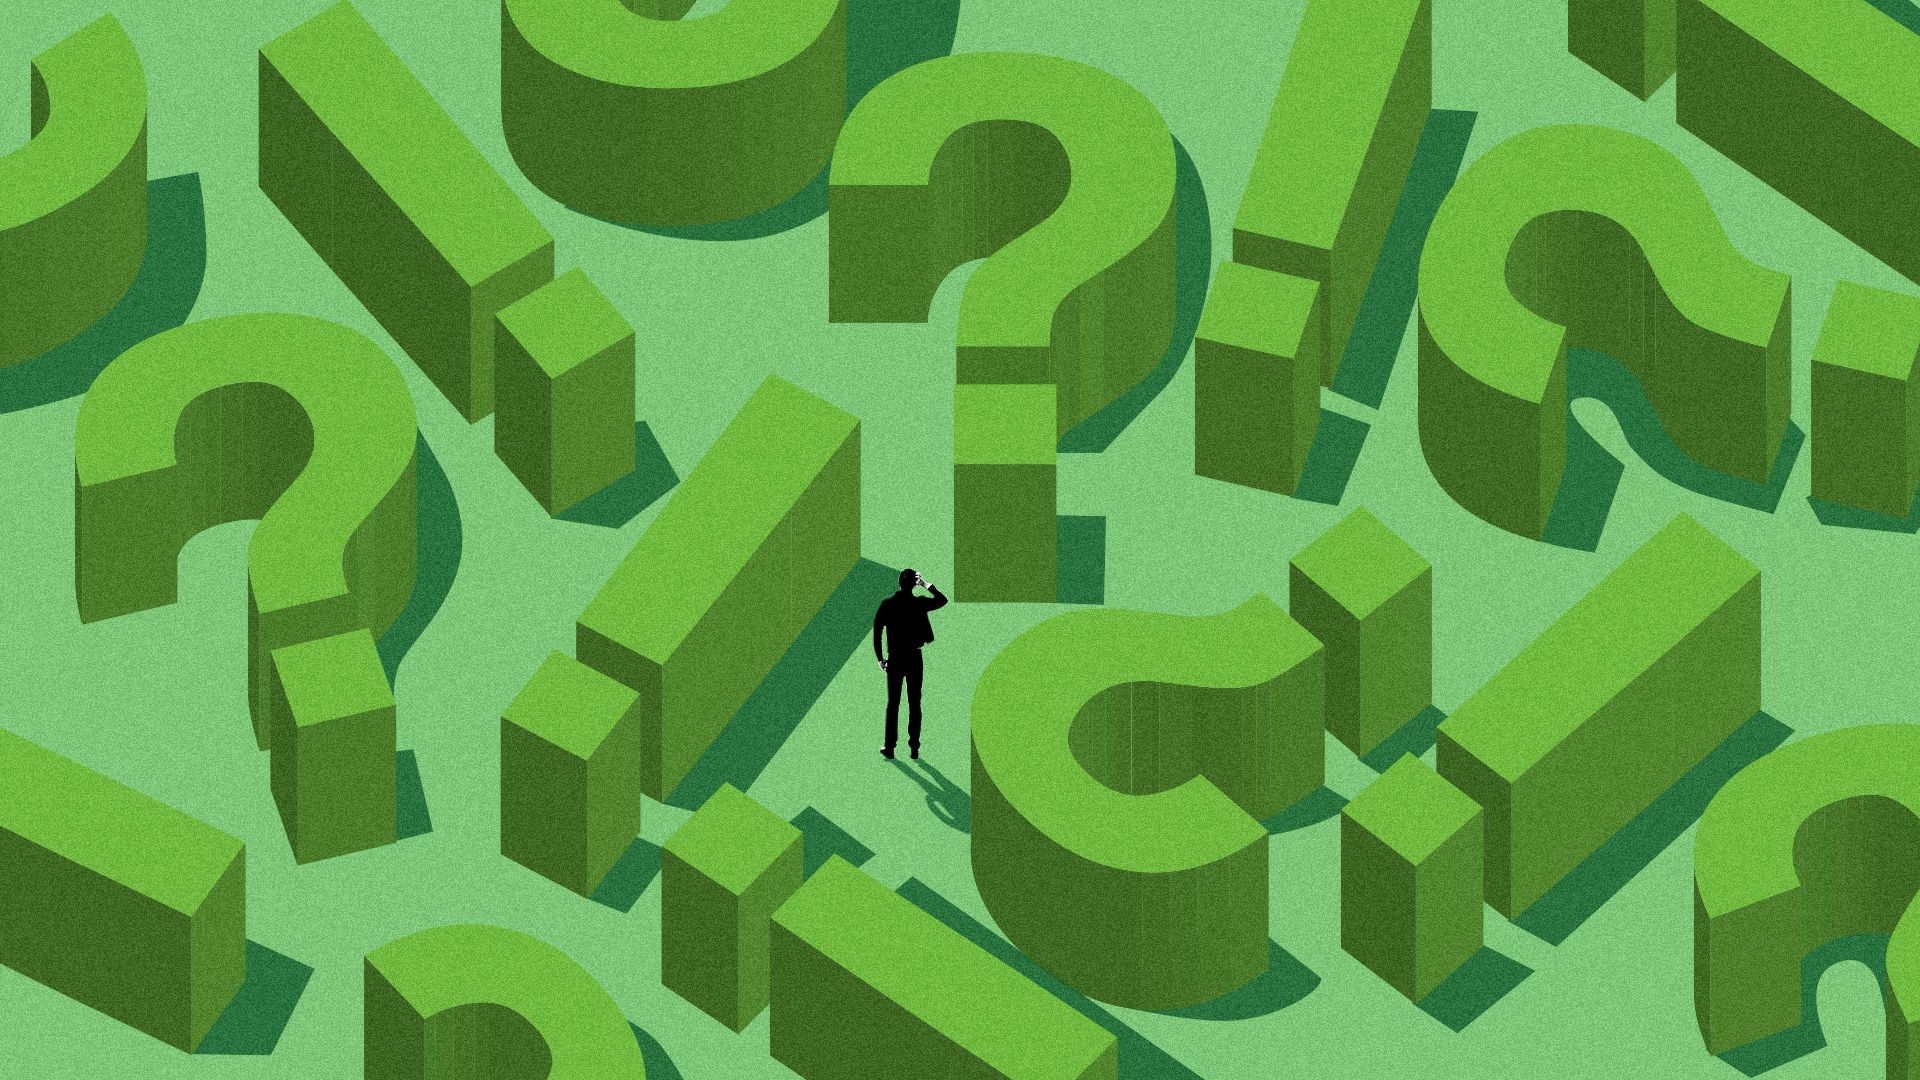 Illustration of a man in a hedge maze made up of question marks and exclamation marks.